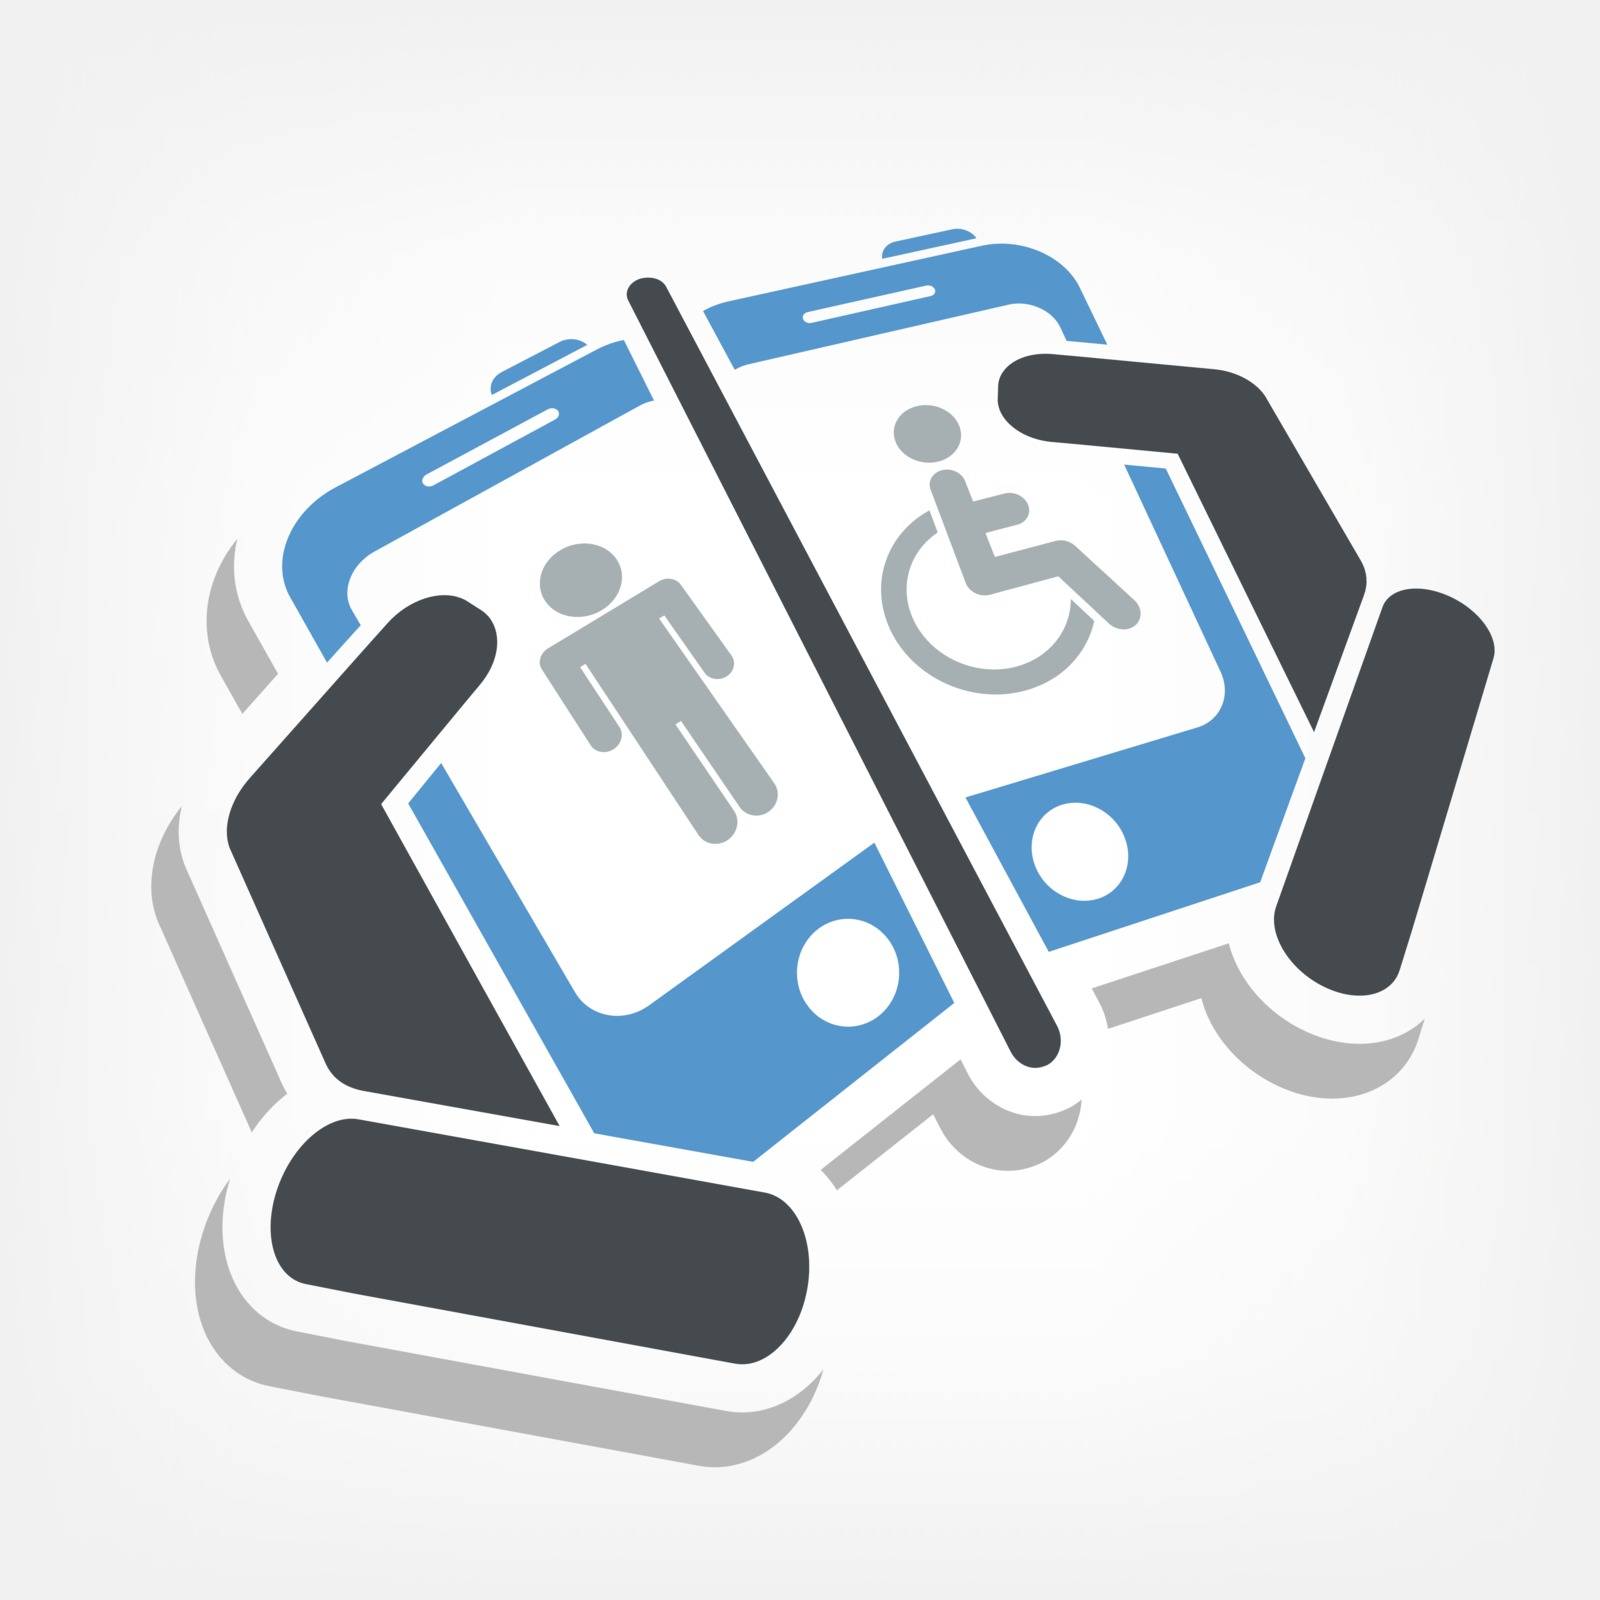 Disabled device